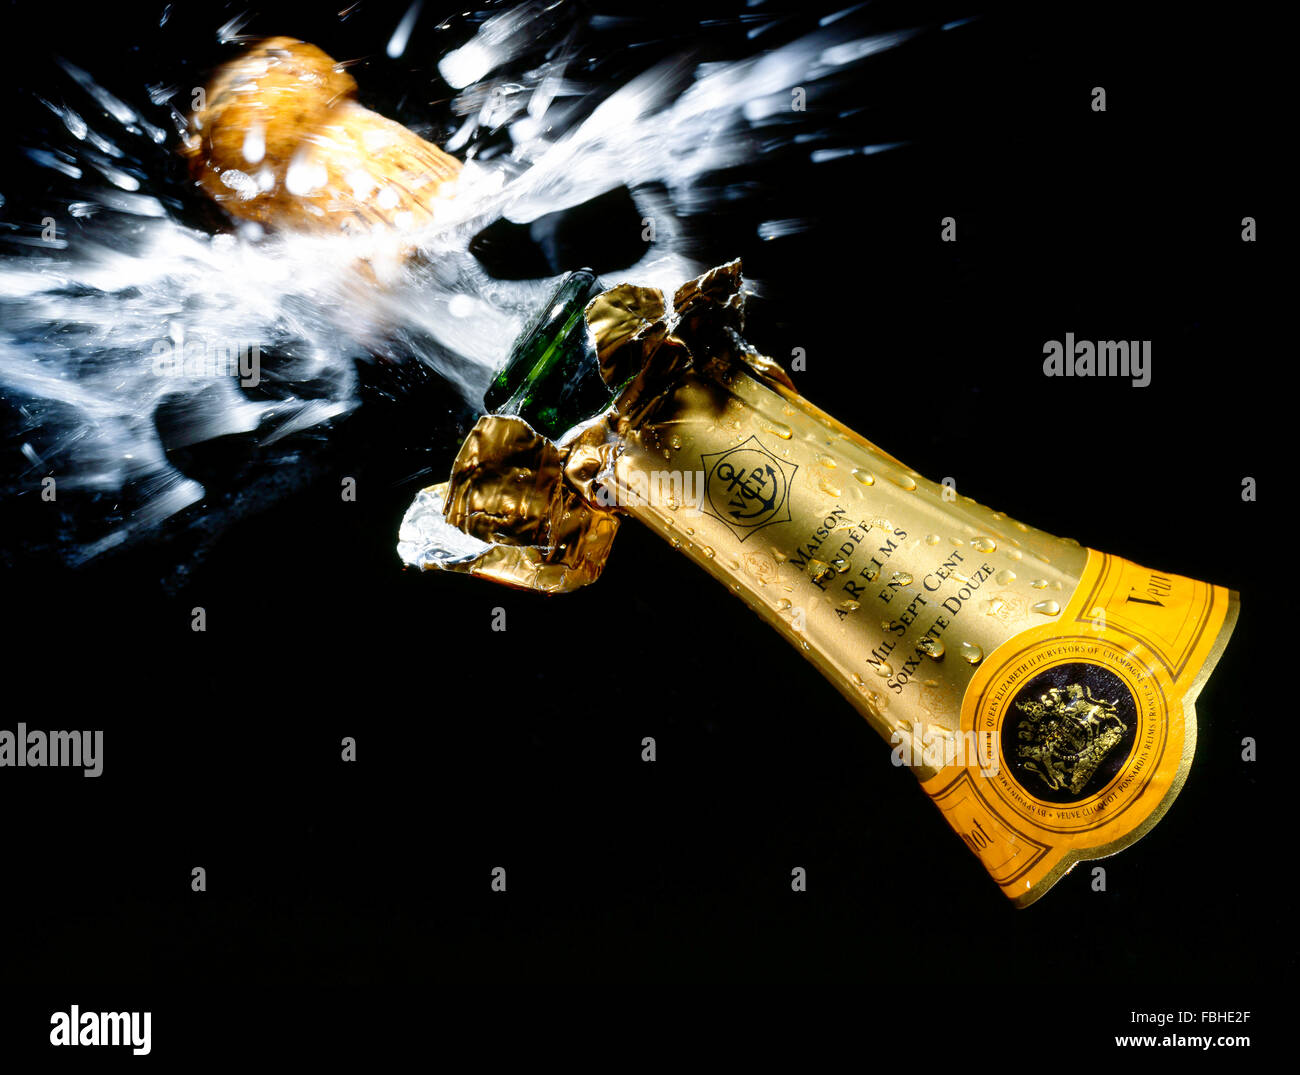 Veuve Clicquot champagne cork popping, Londres, Angleterre, Royaume-Uni Banque D'Images